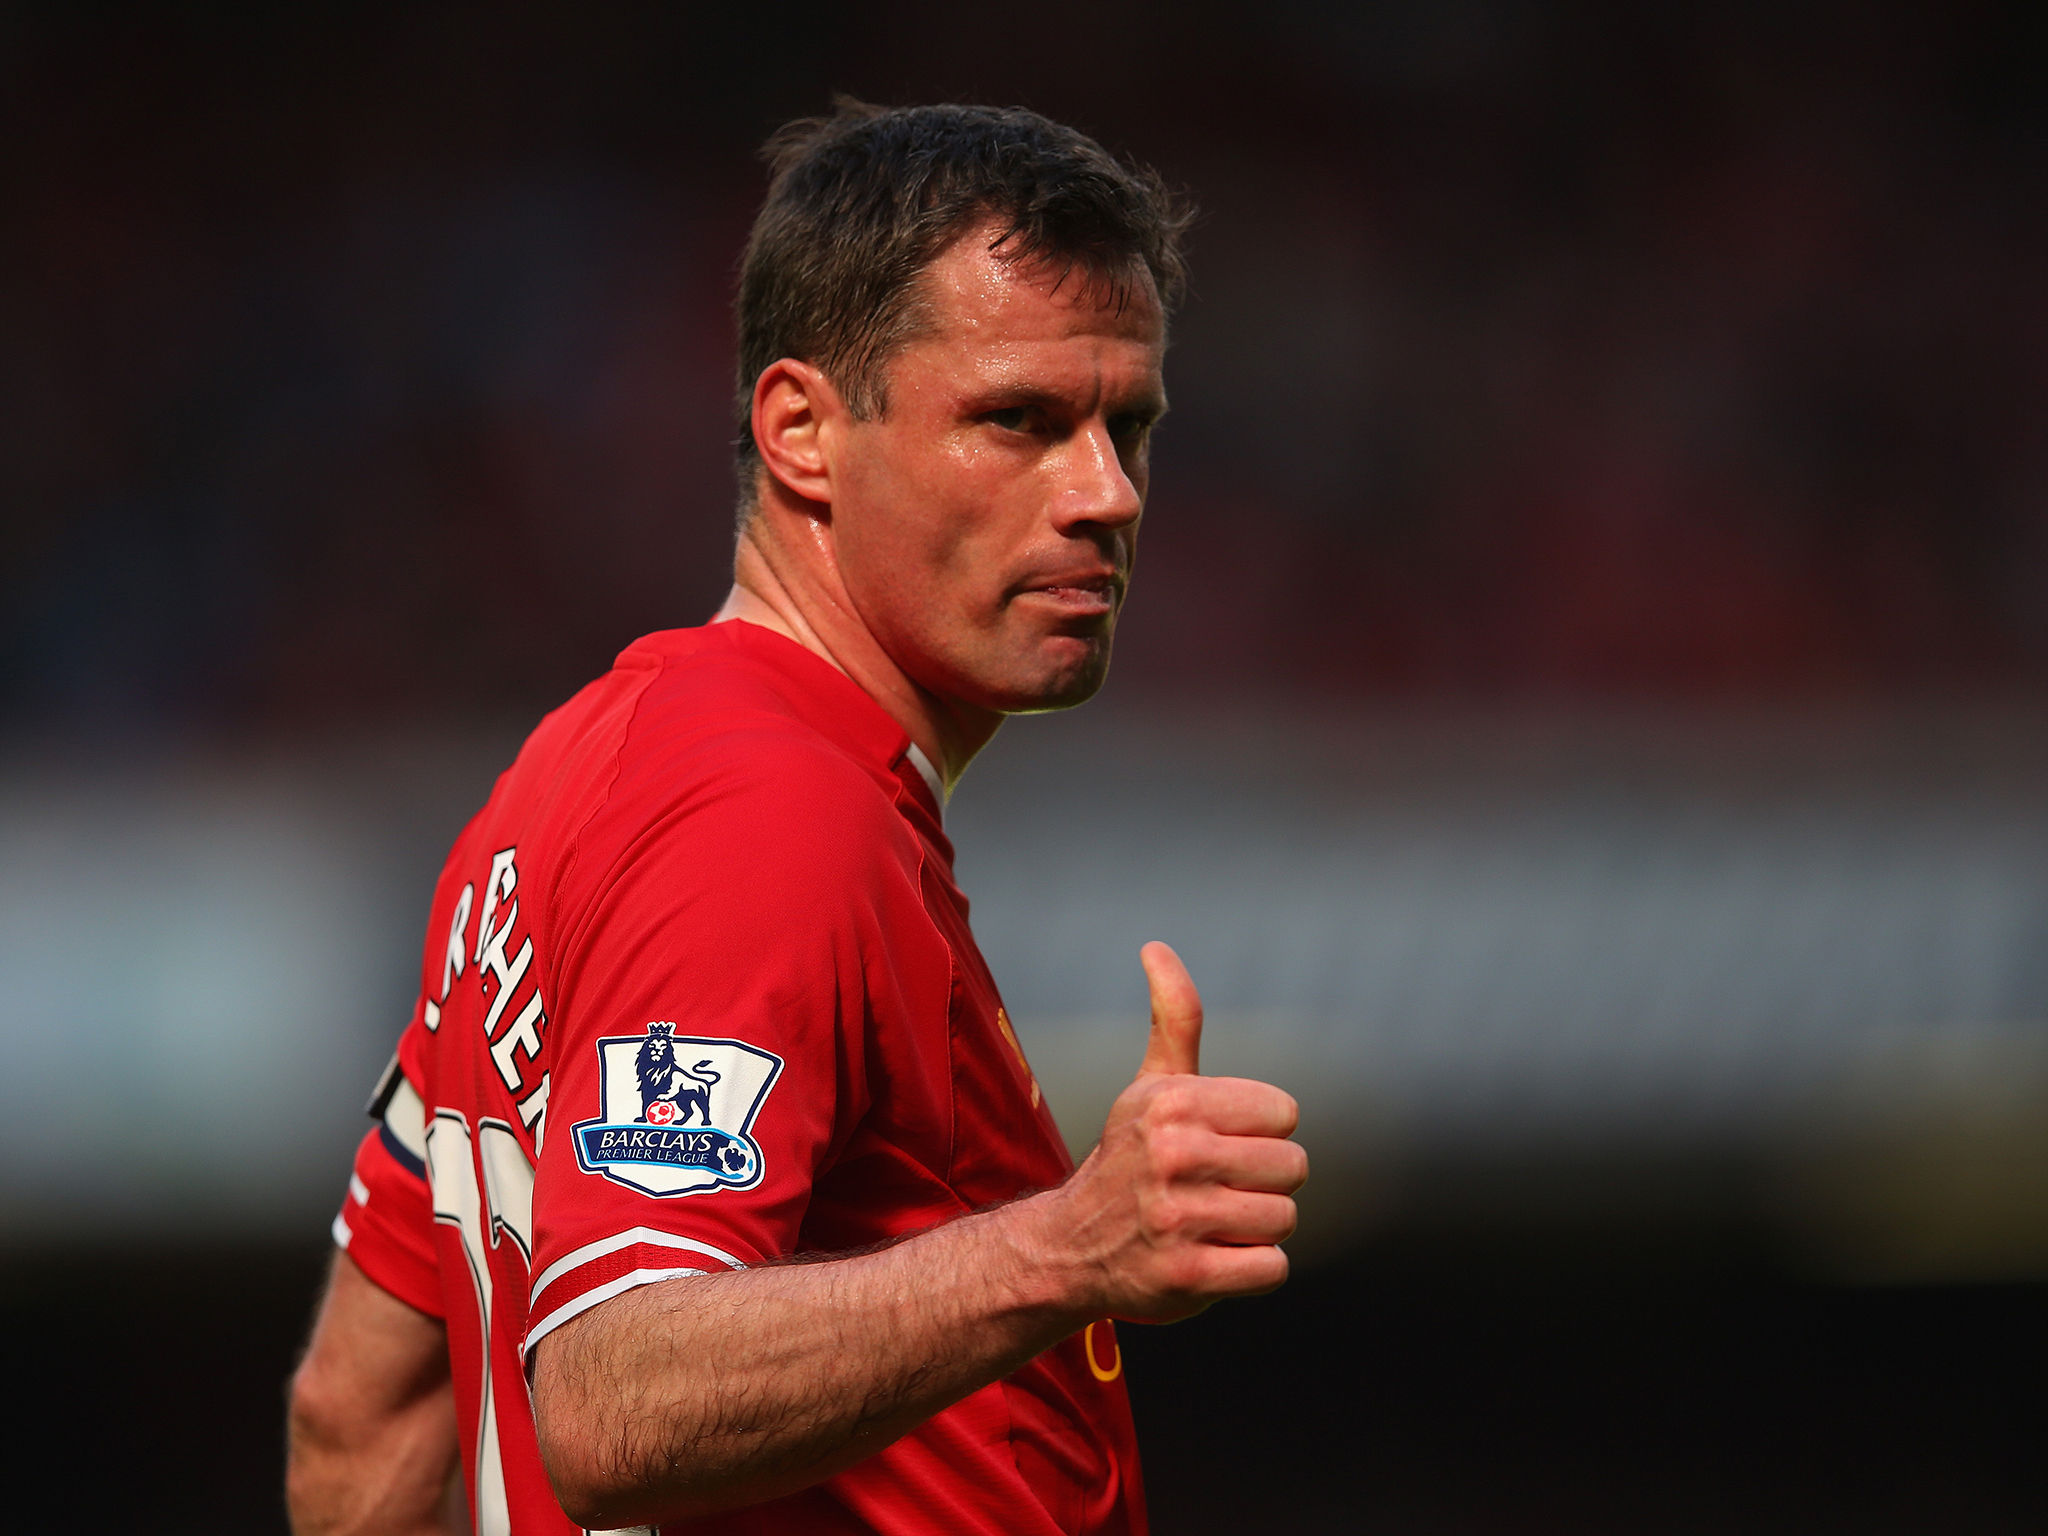 Liverpool FC England Football Player British Hand Gesture Thumbs Up Jamie Carragher 2048x1536